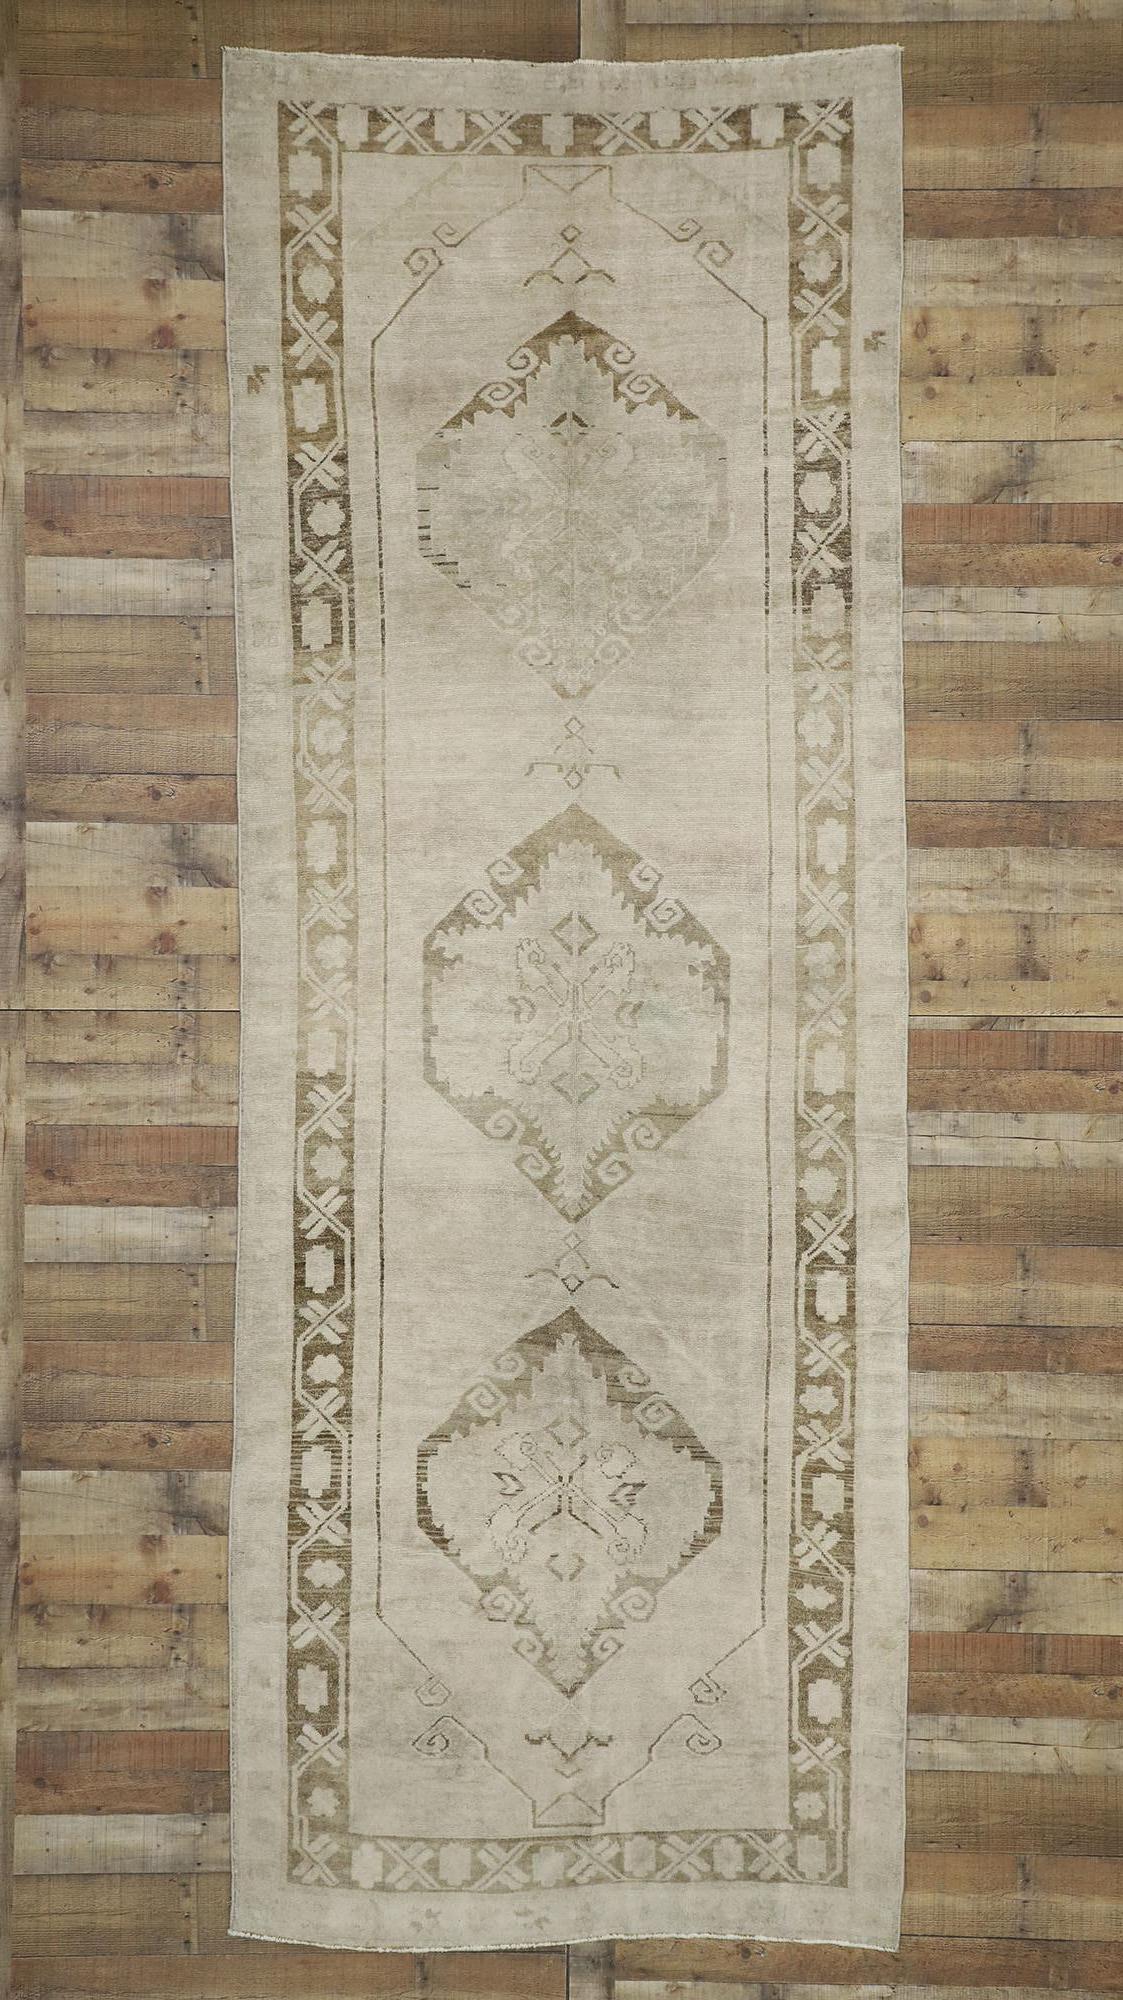 Vintage Turkish Oushak Runner with Mission Style and Warm, Earth-Tones For Sale 1